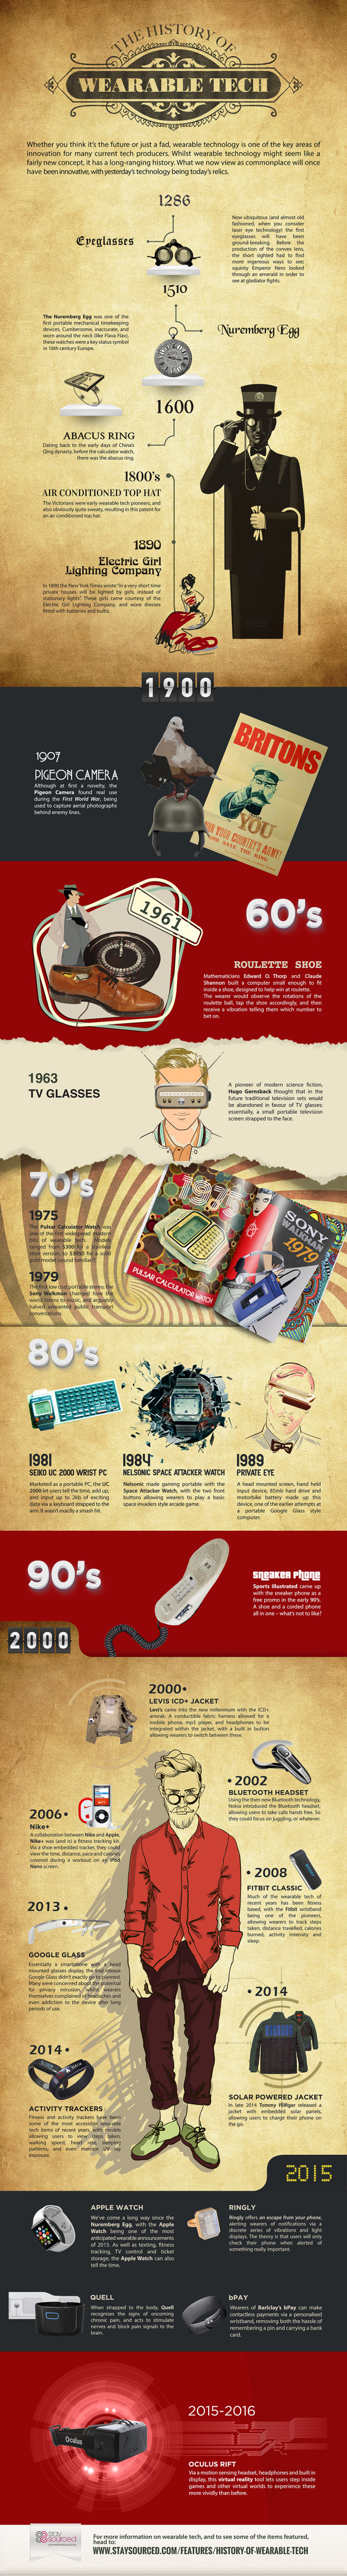 Evolution of Wearable Technology